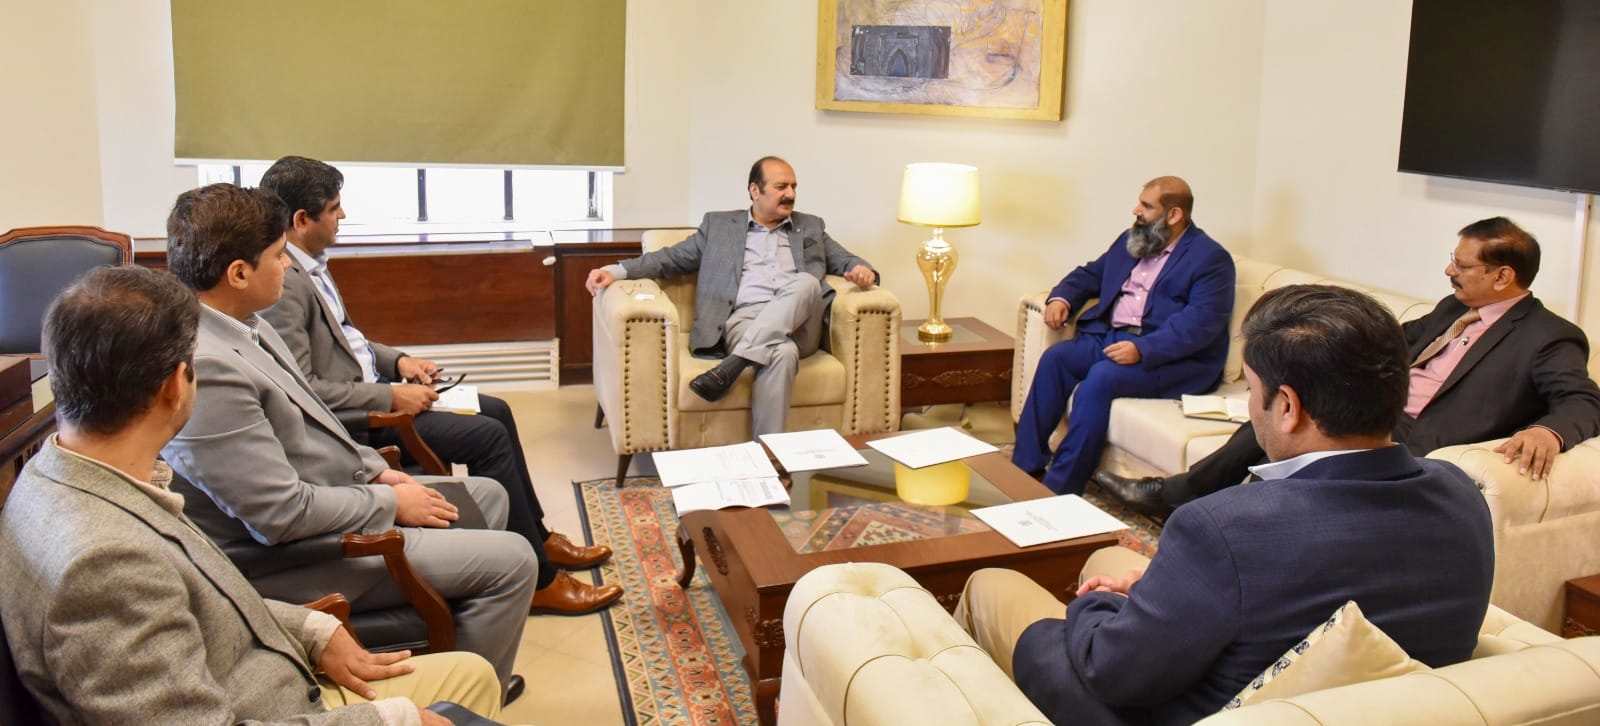 A meeting was held with CEO NITB Babar Majid Bhatti chaired by Chairman Rana Mashhood in which matters of mutual interest including building synergies and working together to bring Digital Transformation for empowering youth were discussed.